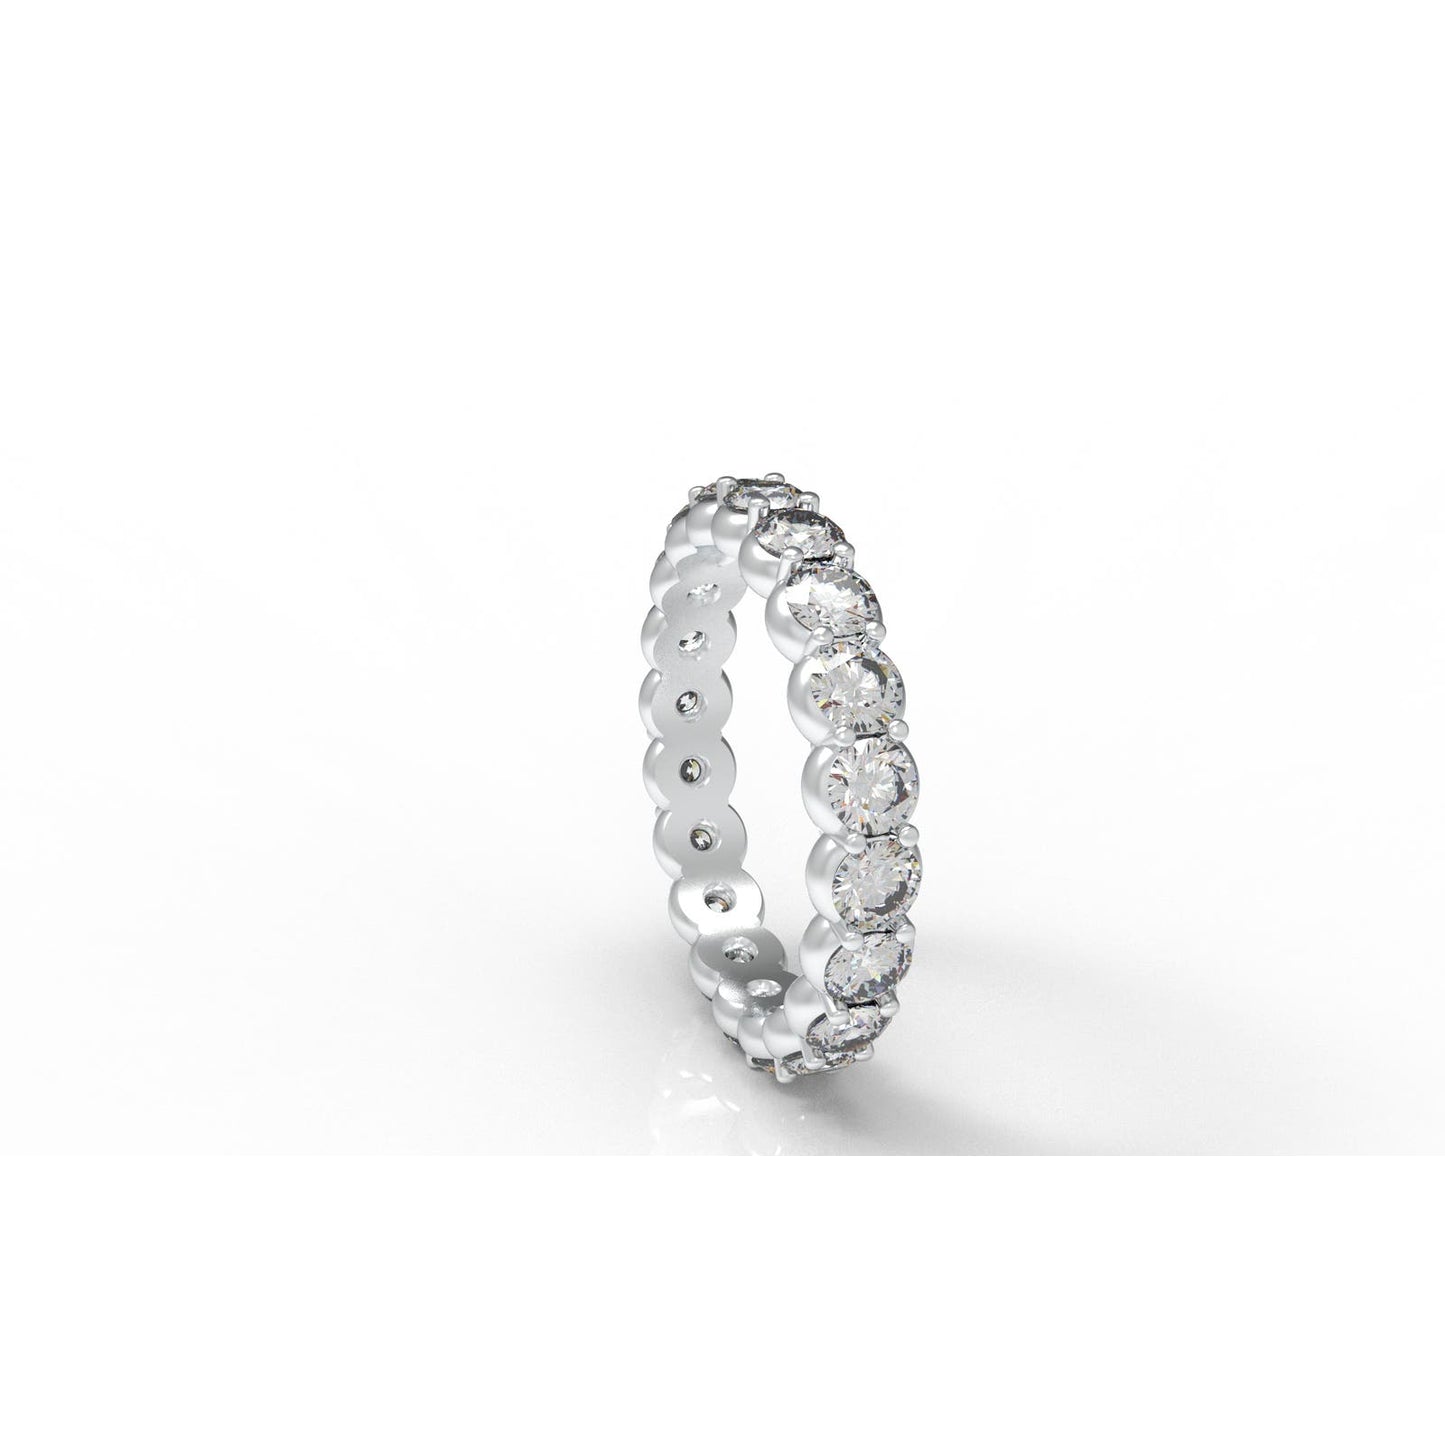 14K White Gold Stackable Ring with 1.55 Ct Round Brilliant Cut Diamonds - Size 5